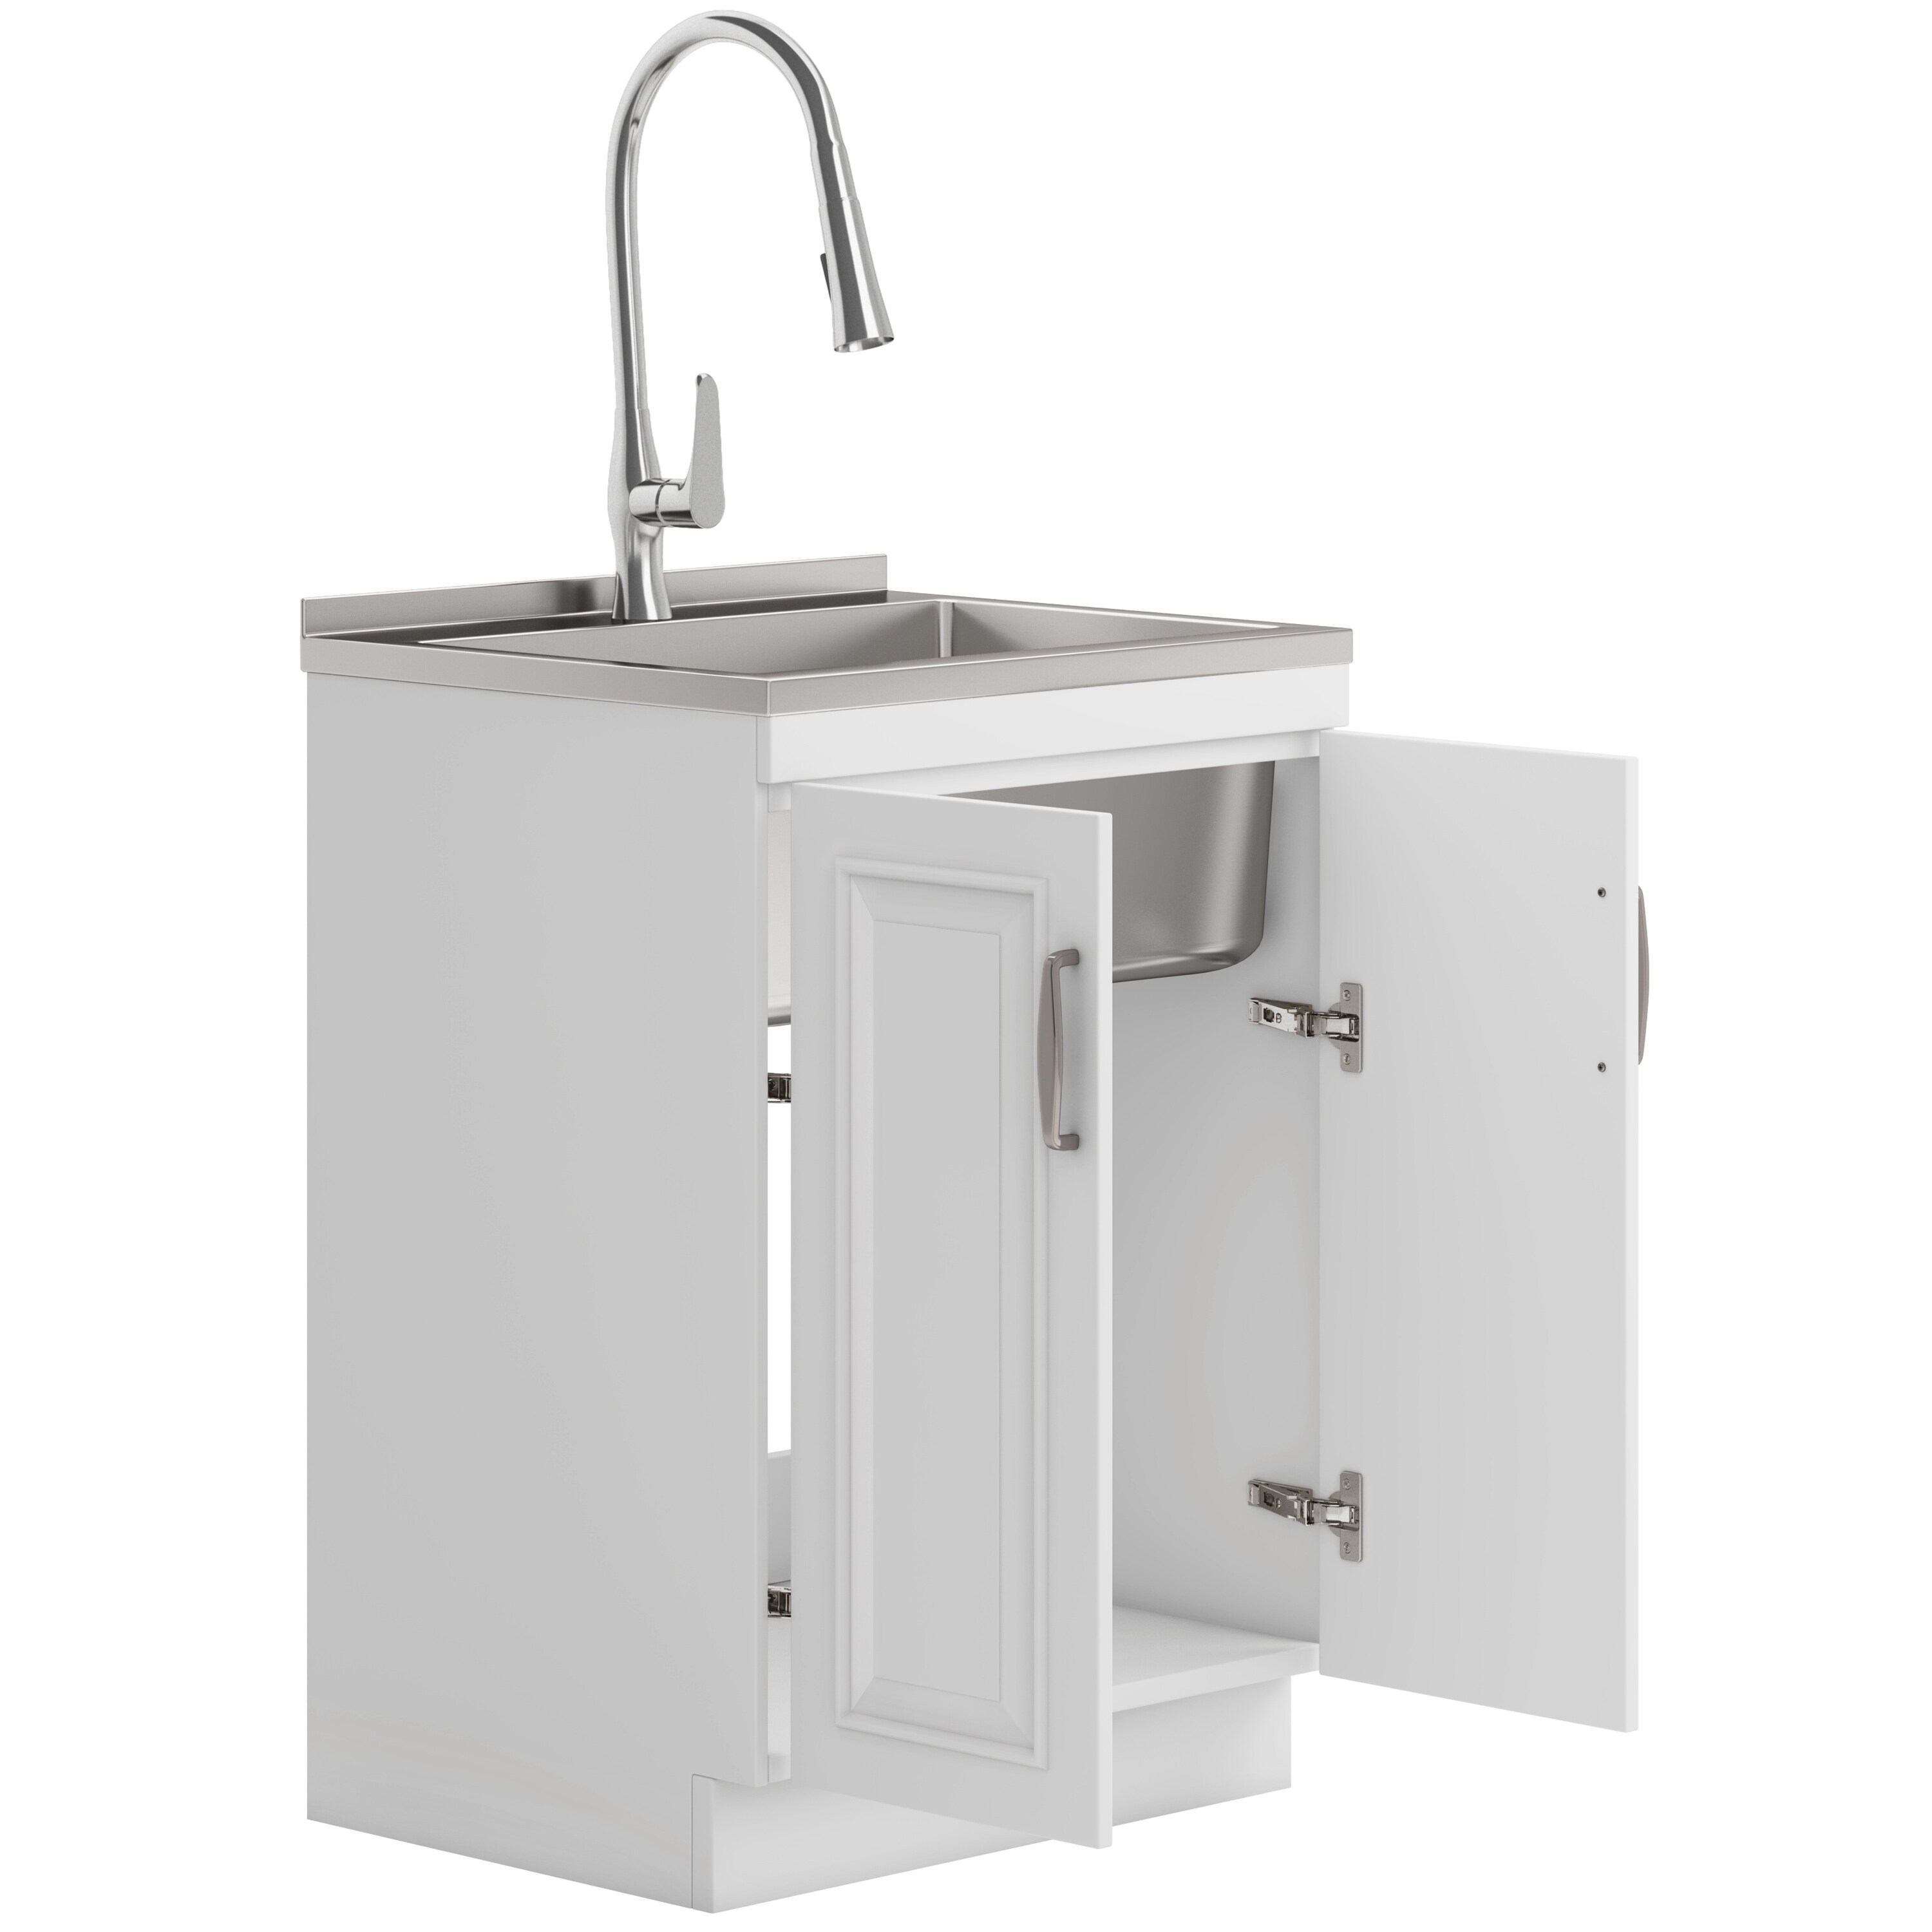 2 Sided Kitchen Sink Caddy – Hype Bargains